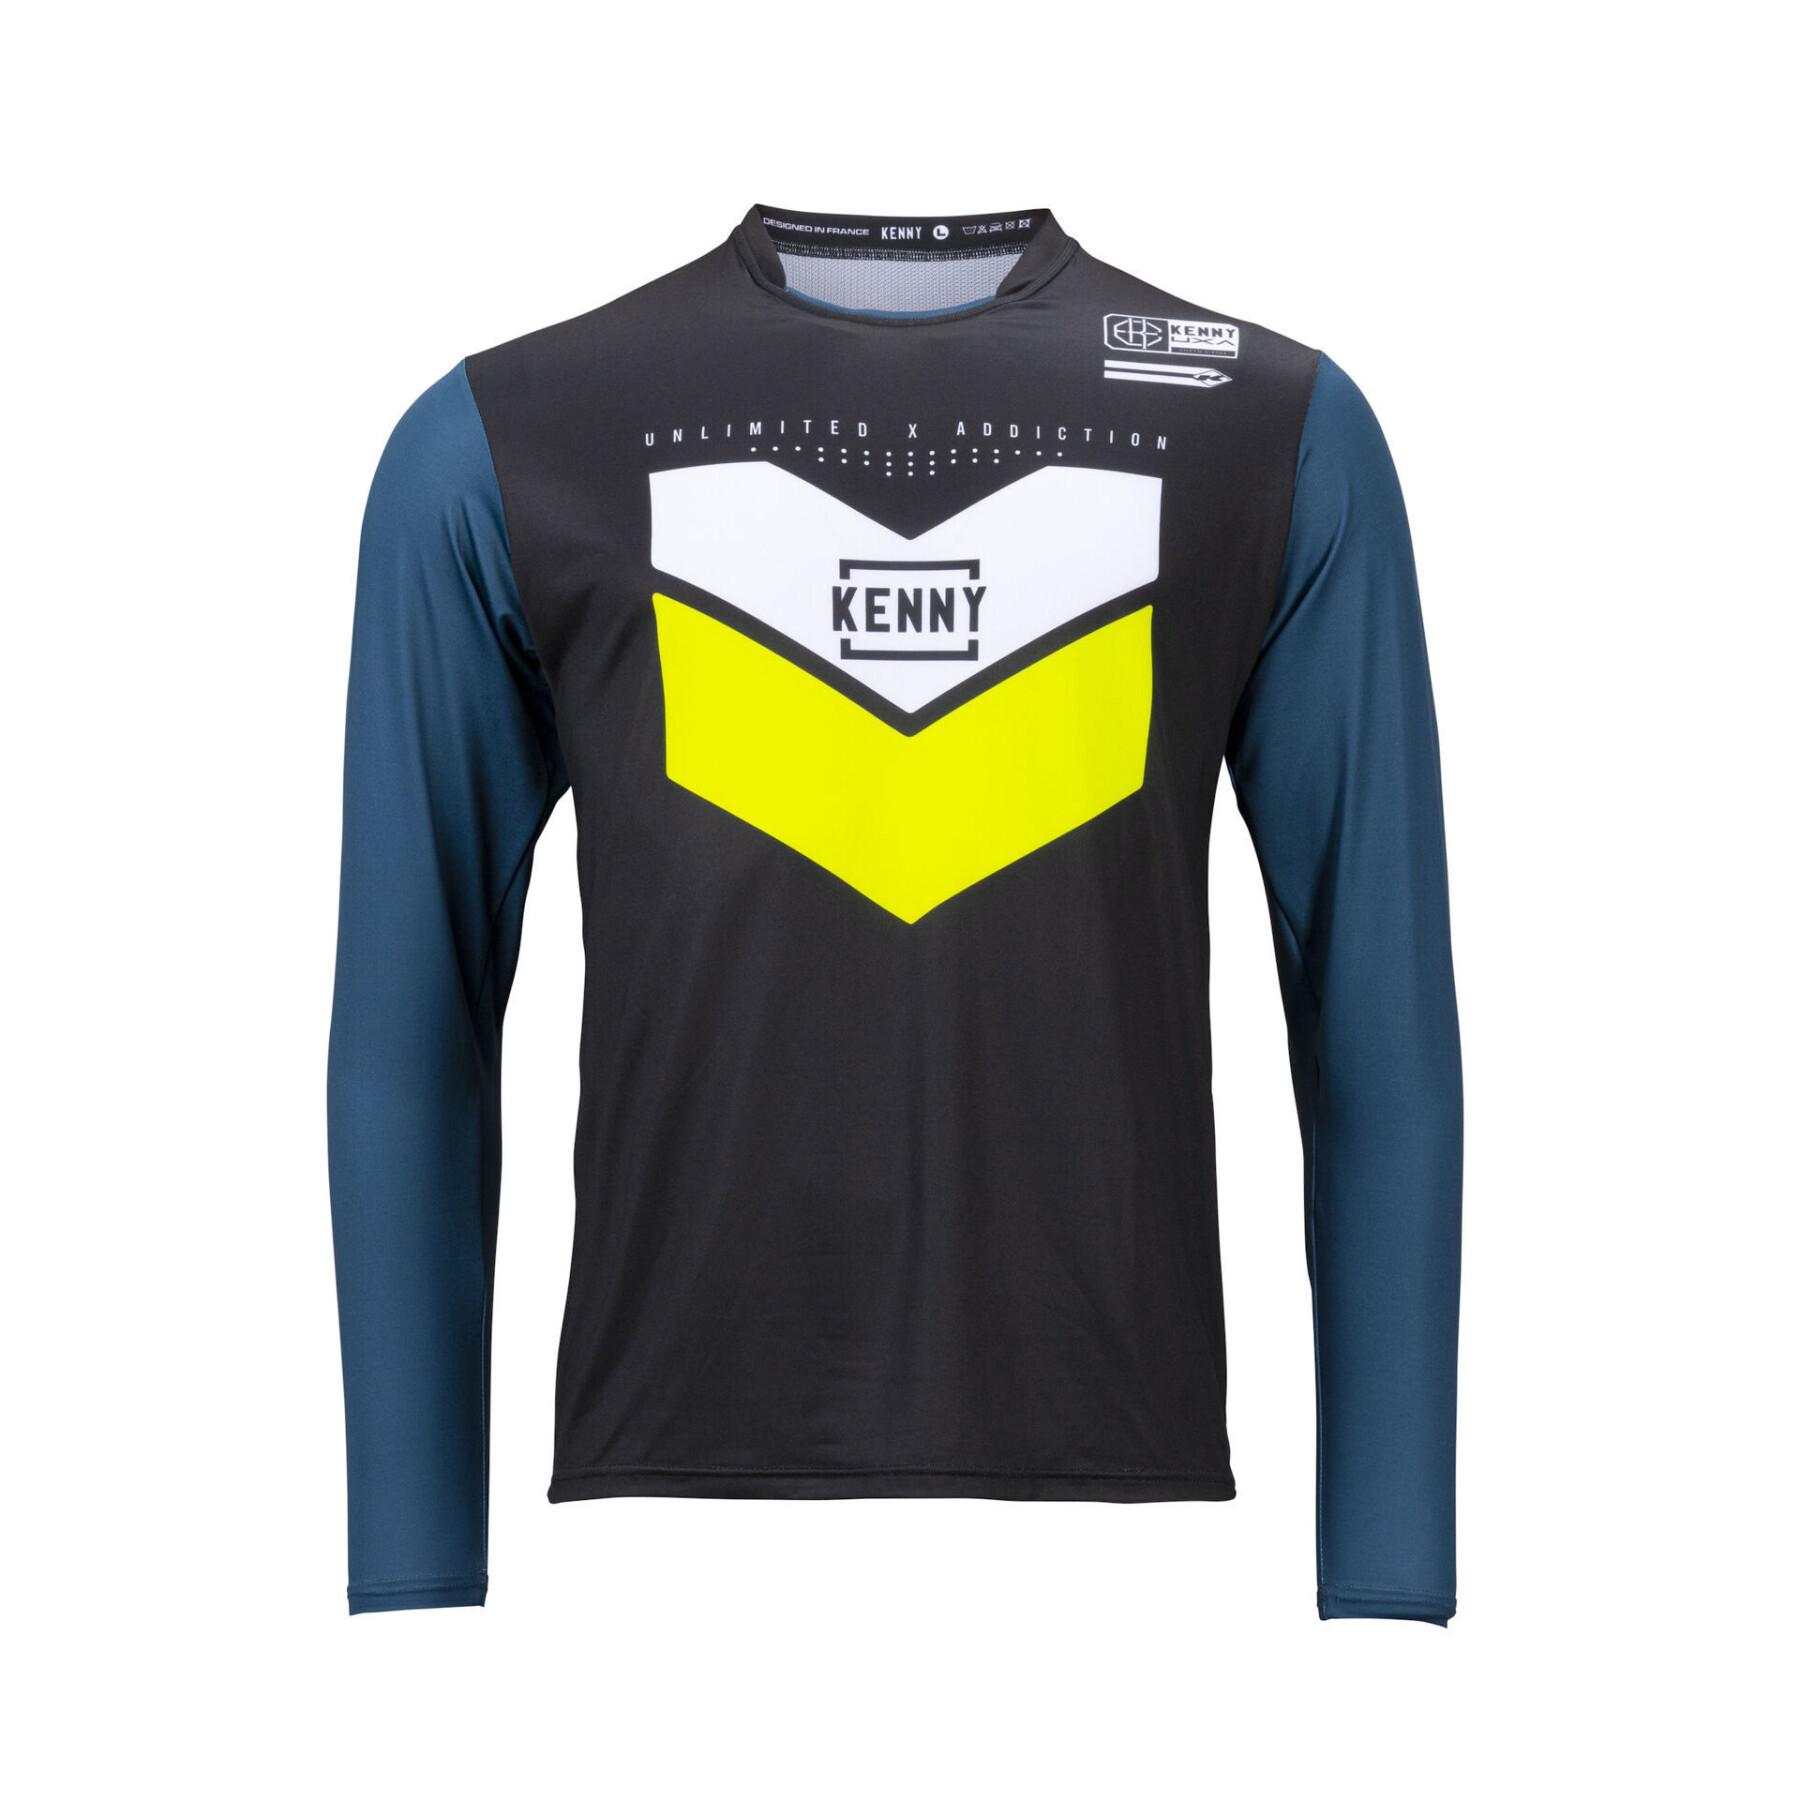 Maillot manches longues Kenny Prolight Slim Fit